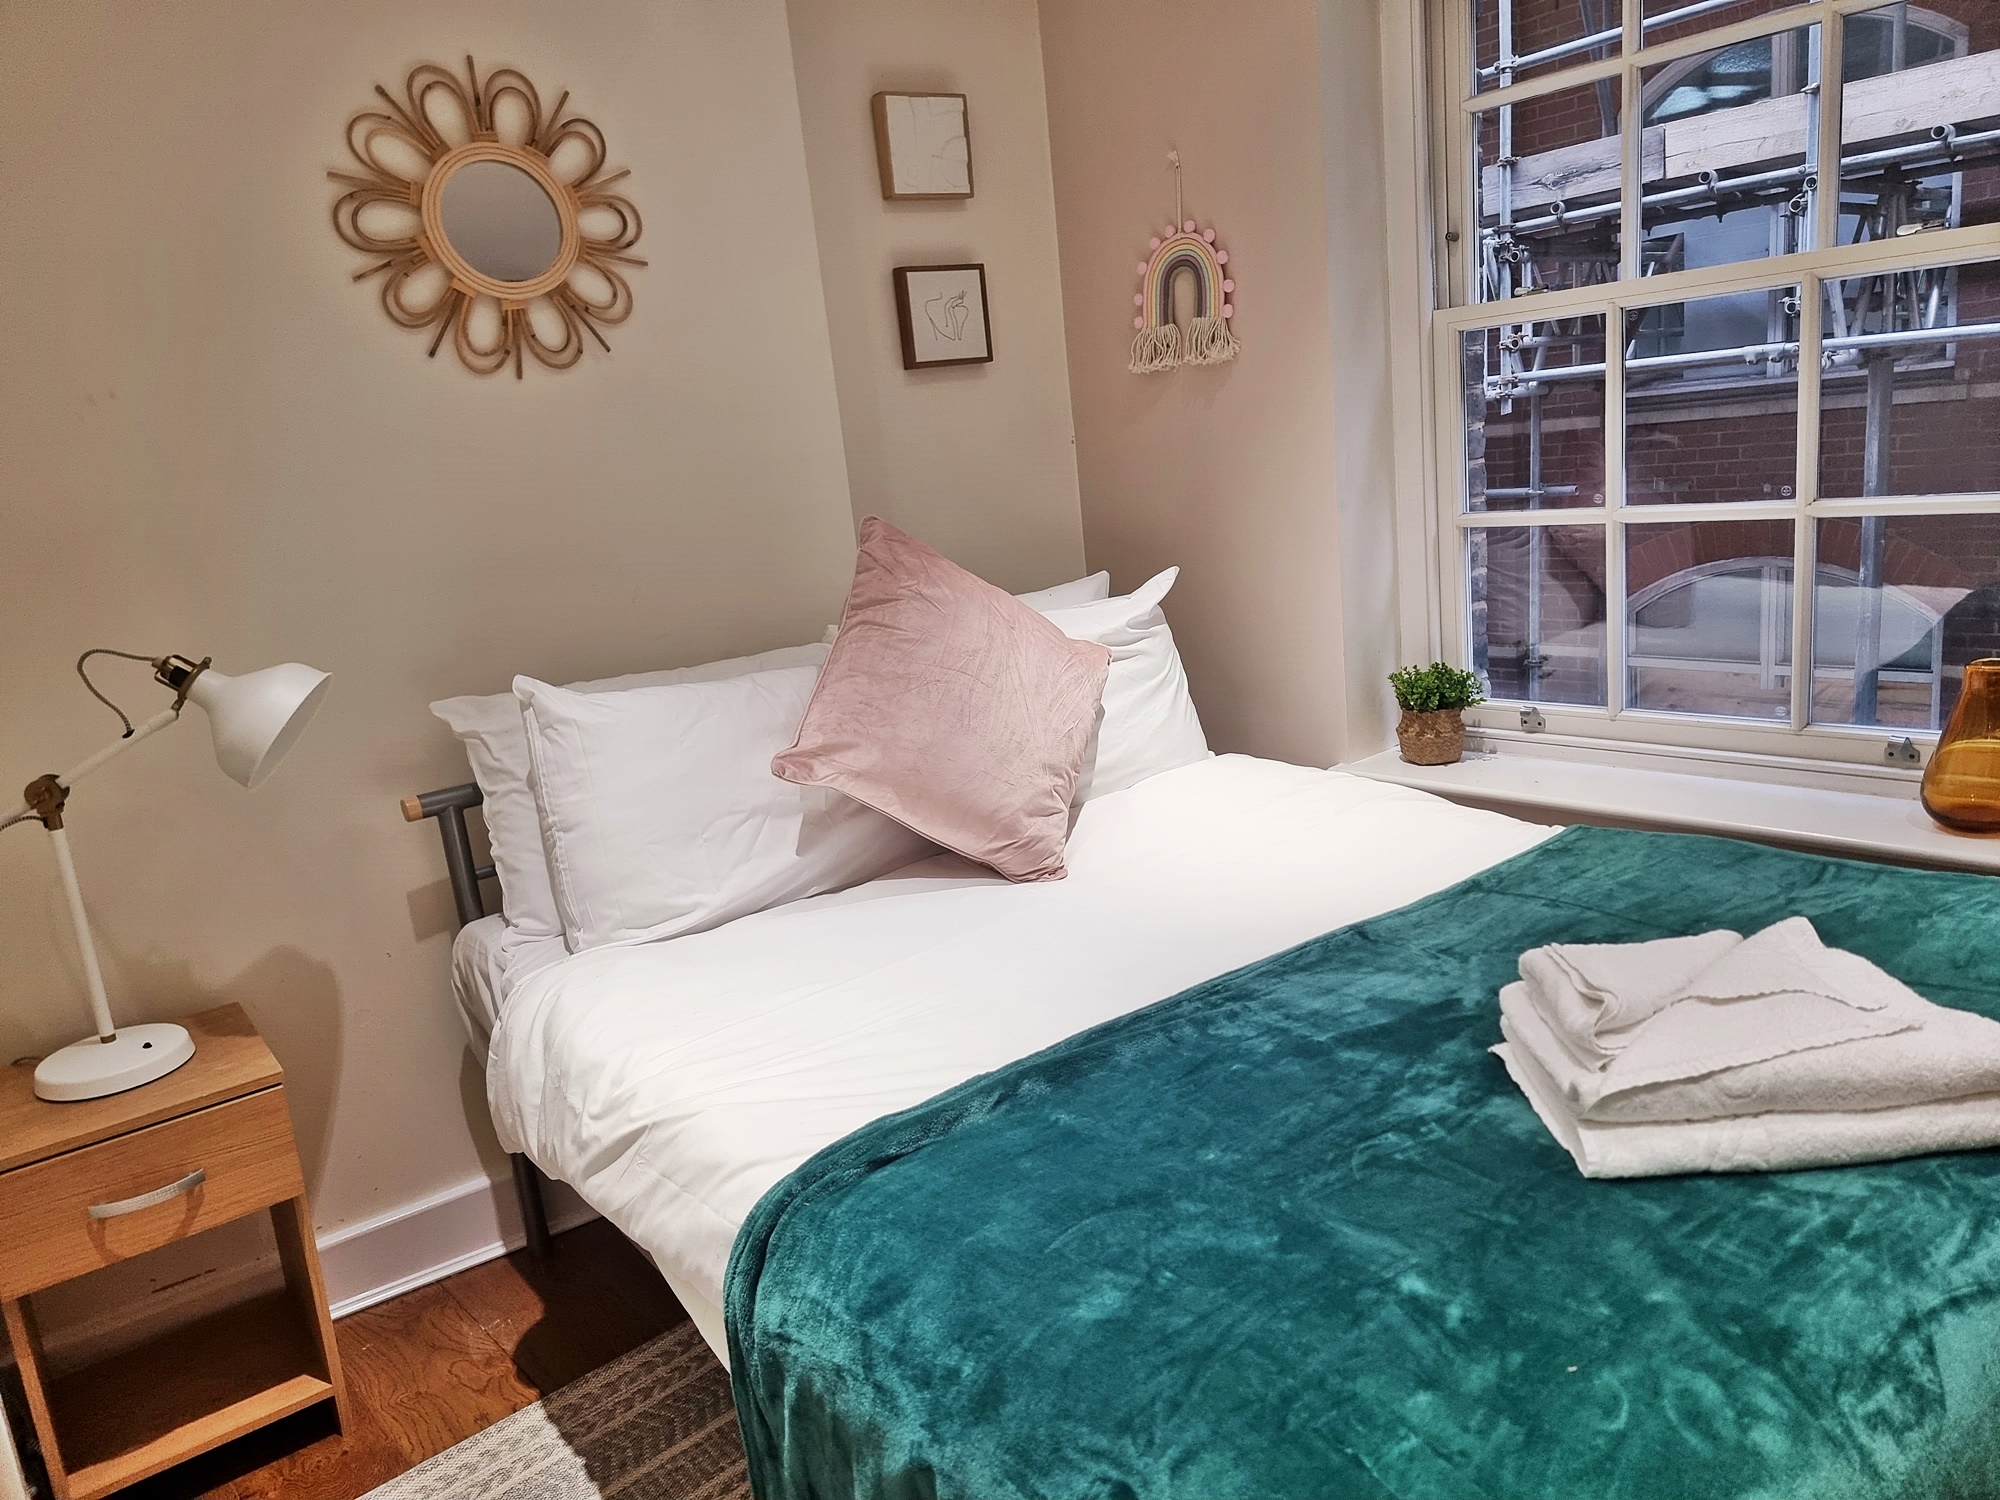 Liverpool-Street-Serviced-Accommodation-London-City-close-to-tourist-sights-and-tube-station---fully-furnished,-all-bills-included.-Urban-Stay-3